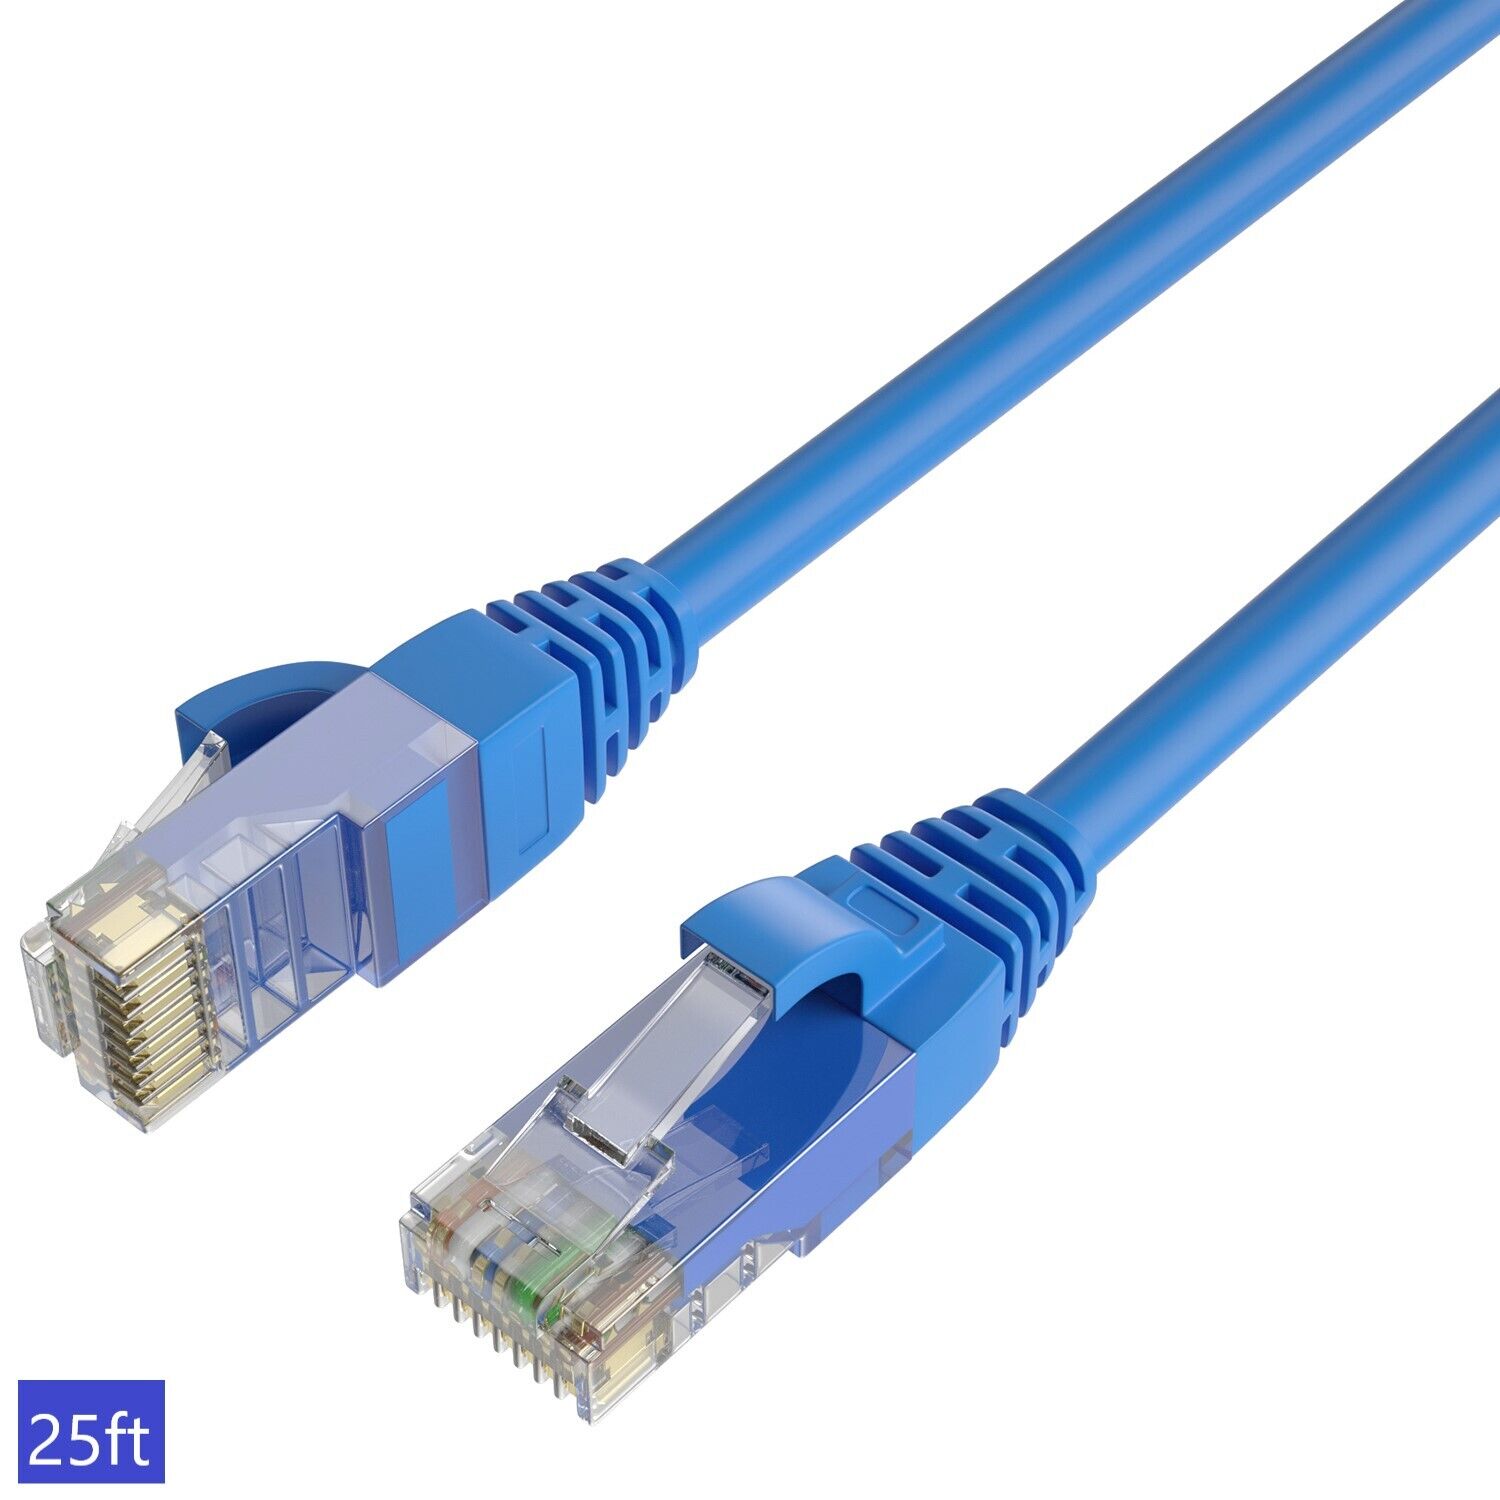 QualGear Cat 6 High-Speed Ethernet Cable - Blue